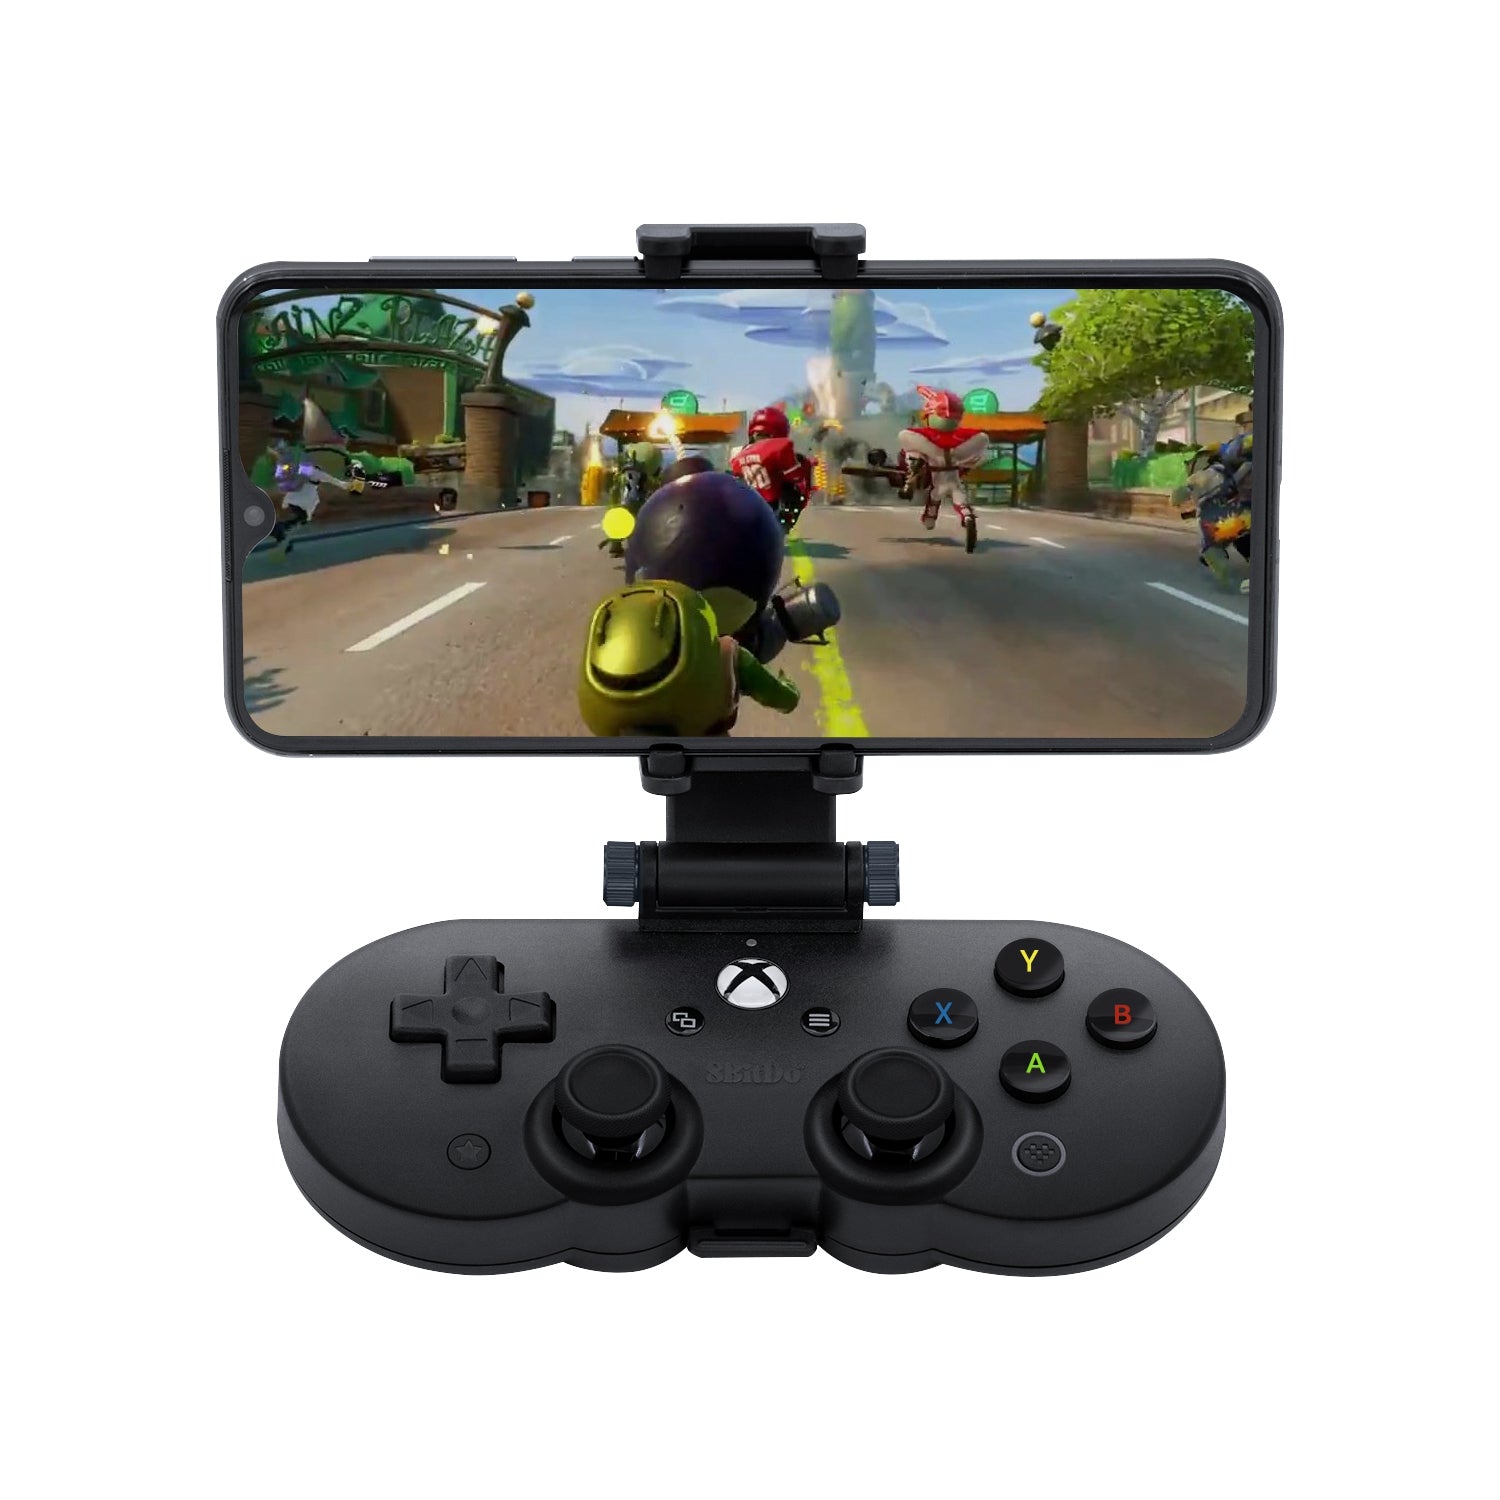  8Bitdo Sn30 Pro for Xbox cloud gaming on Android